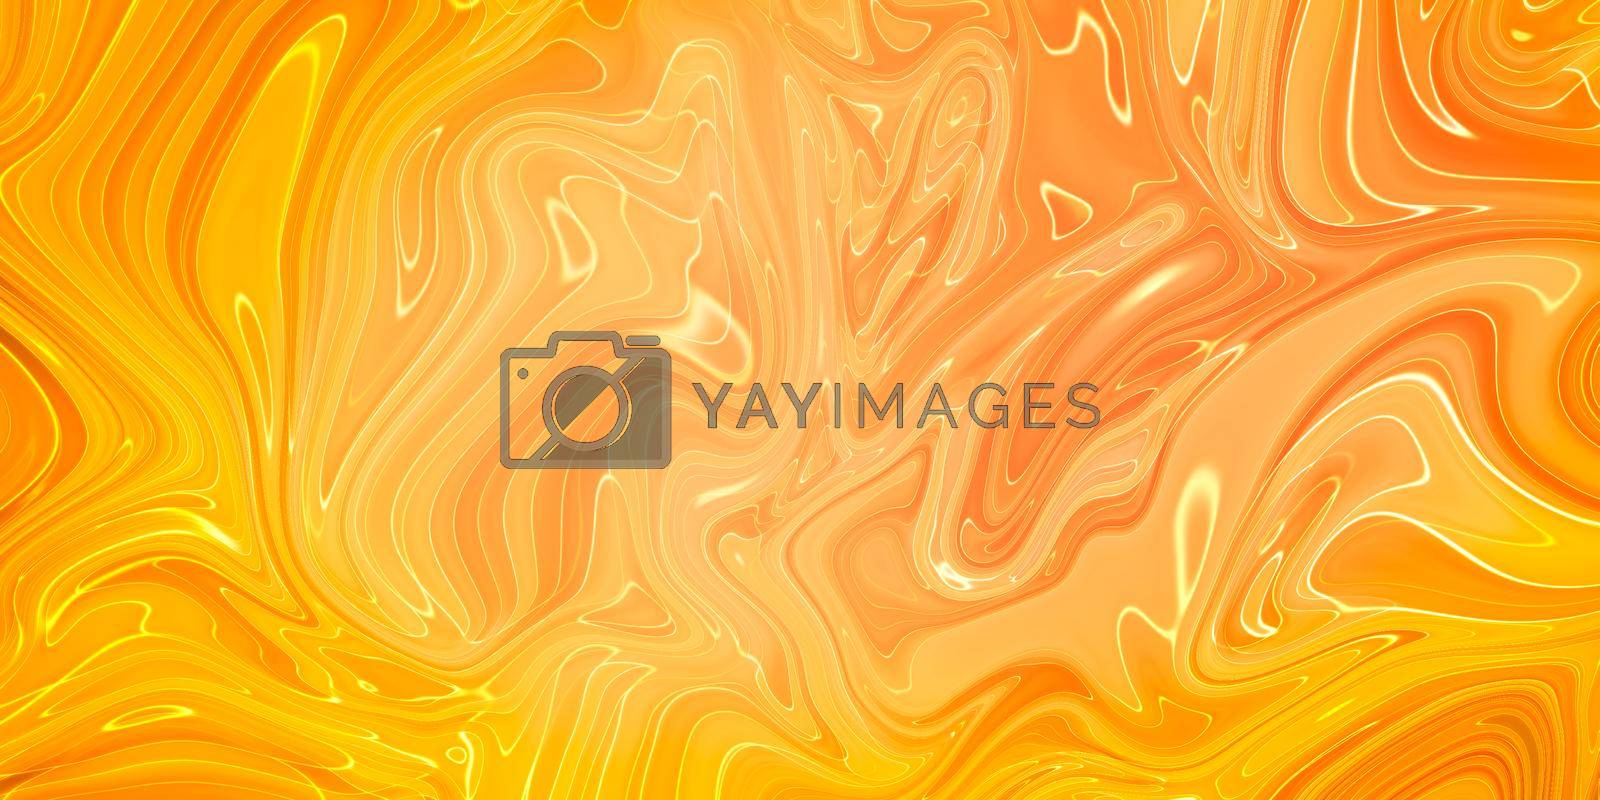 Abstract orange paint background. Acrylic texture with marble pattern.